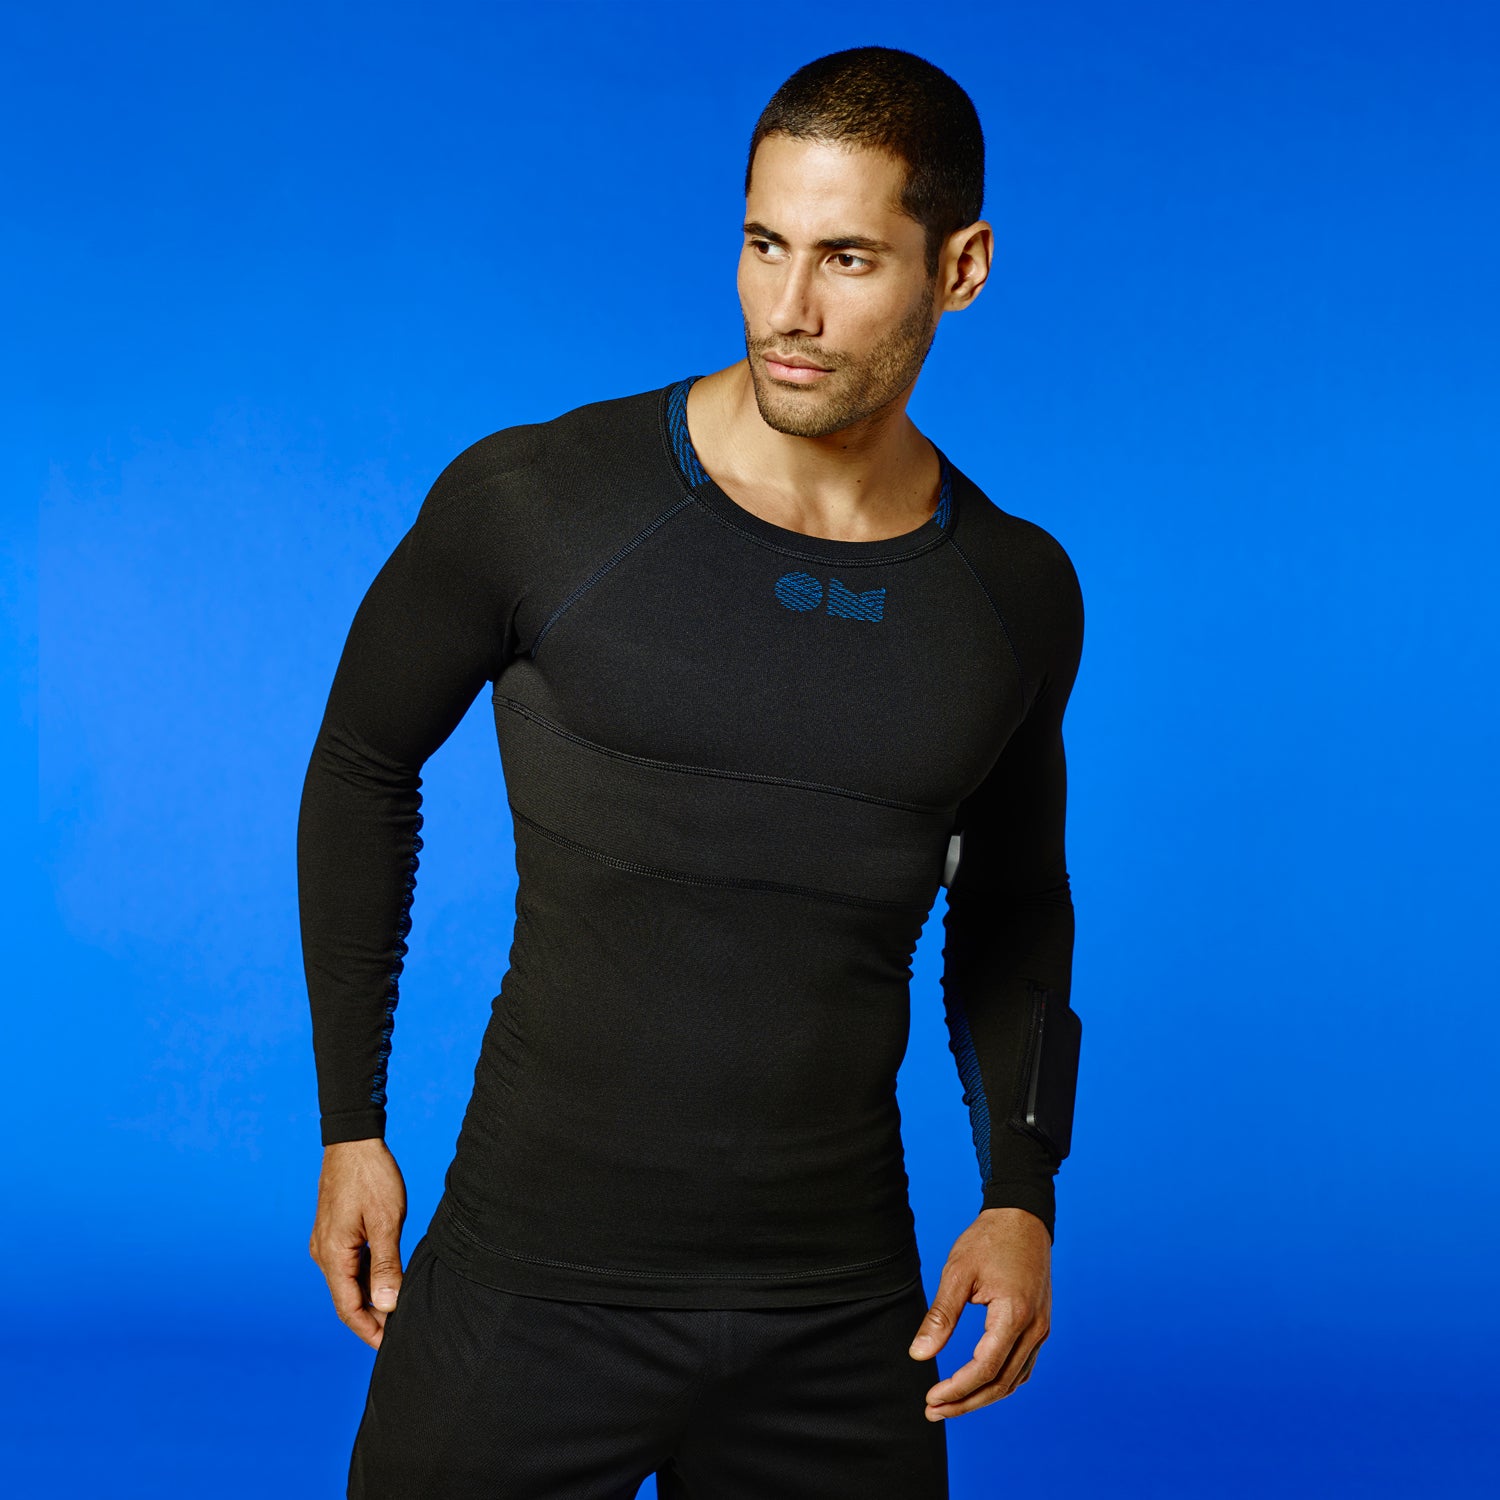 The Really Awesome High-Tech Fitness Apparel You Should Never Buy